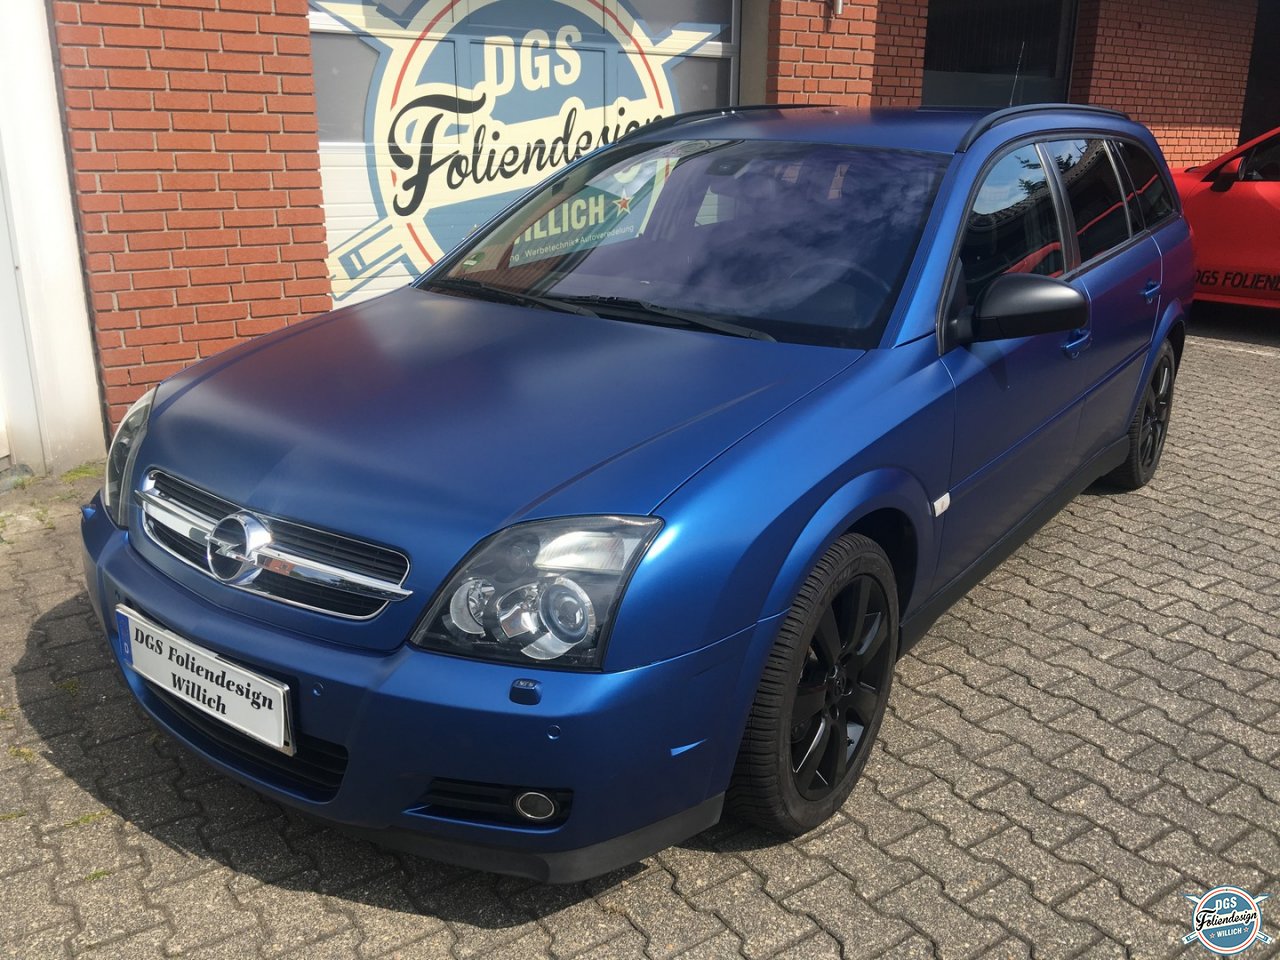 Vollfolierung - Opel Vectra C - DGS-Wrapping & Foliendesign